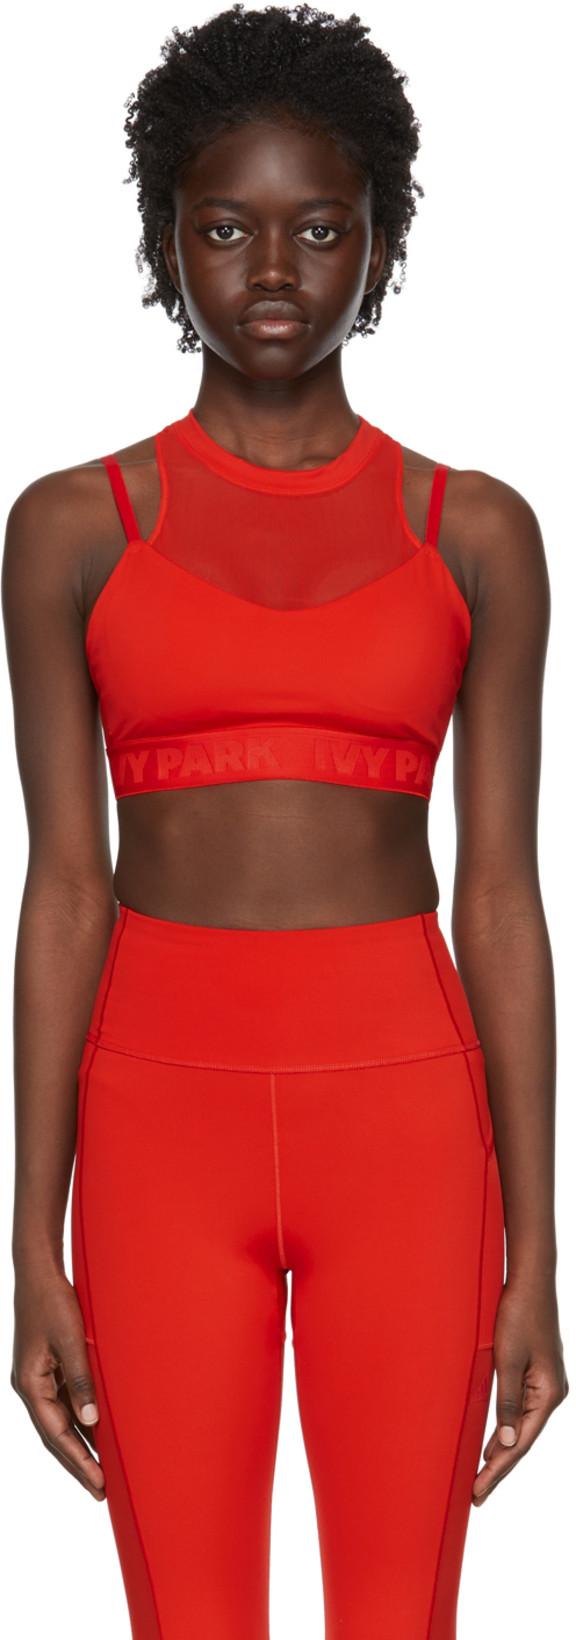 Red Recycled Polyester Sports Bra by ADIDAS X IVY PARK